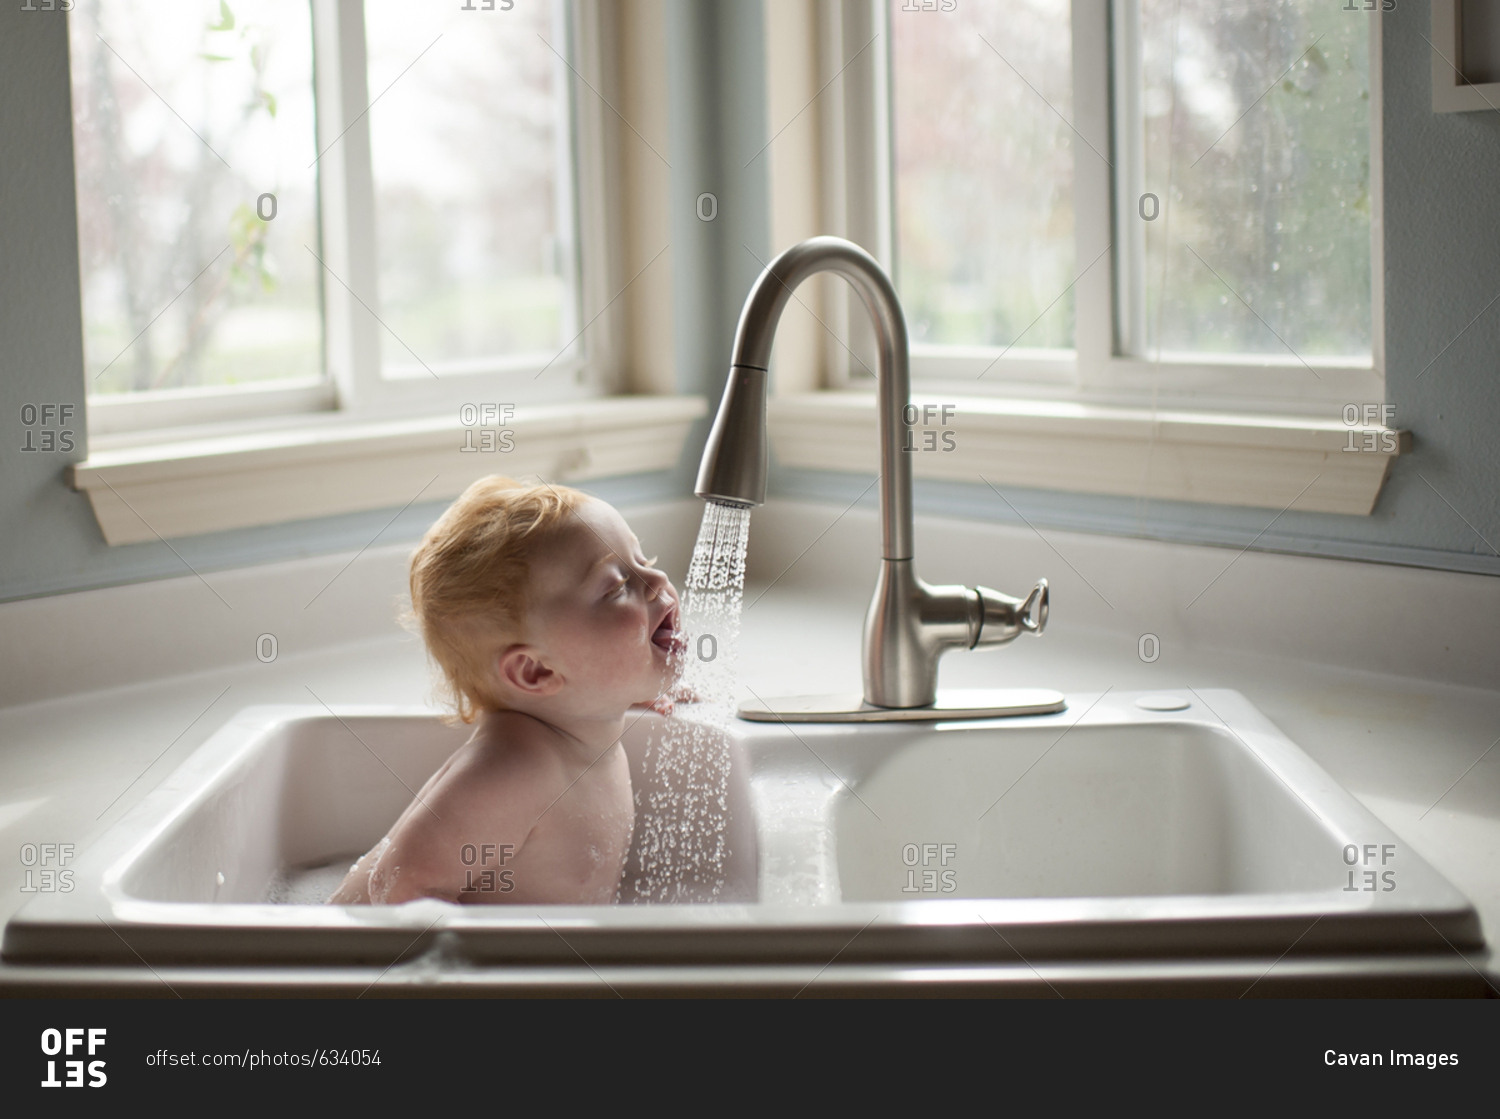 Cute baby boy sticking out tongue under running water from faucet in kitchen sink